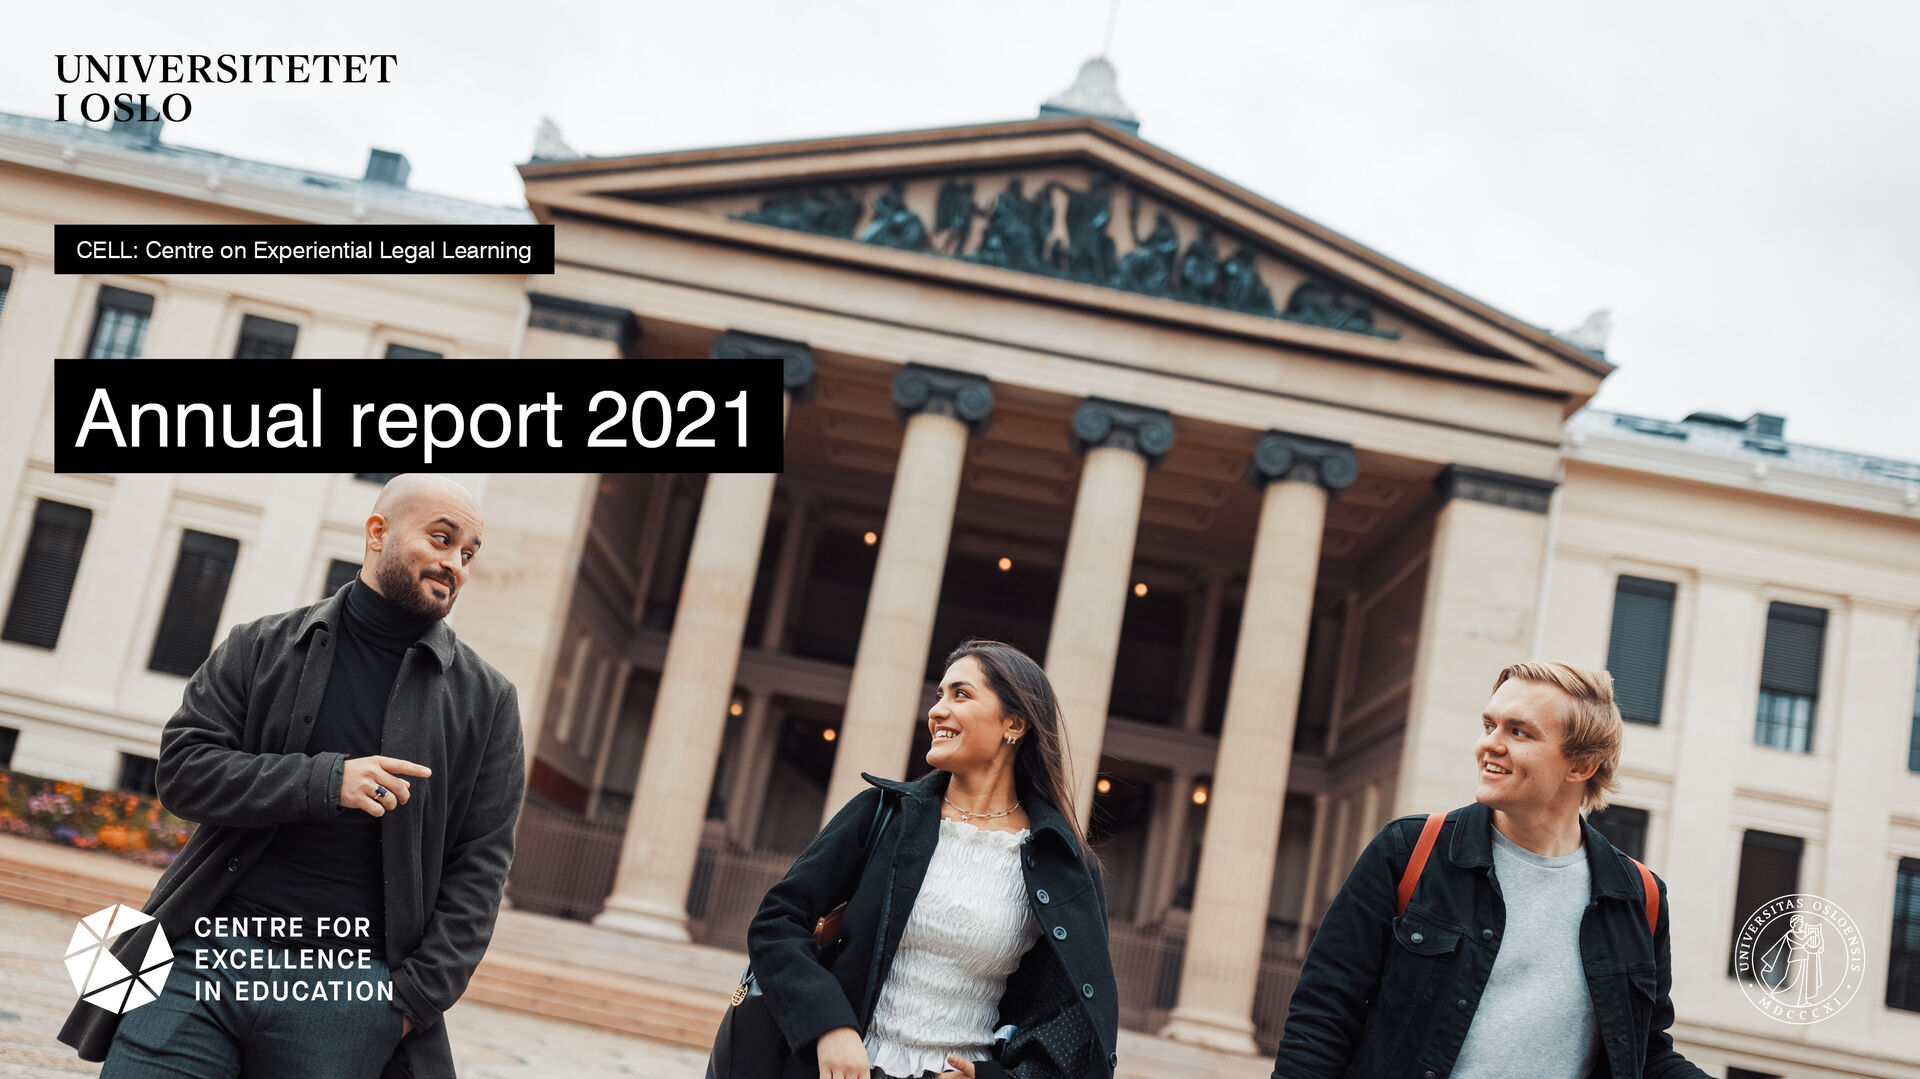 Three students in front of the University of Oslo with the text "Annual report 2021" over